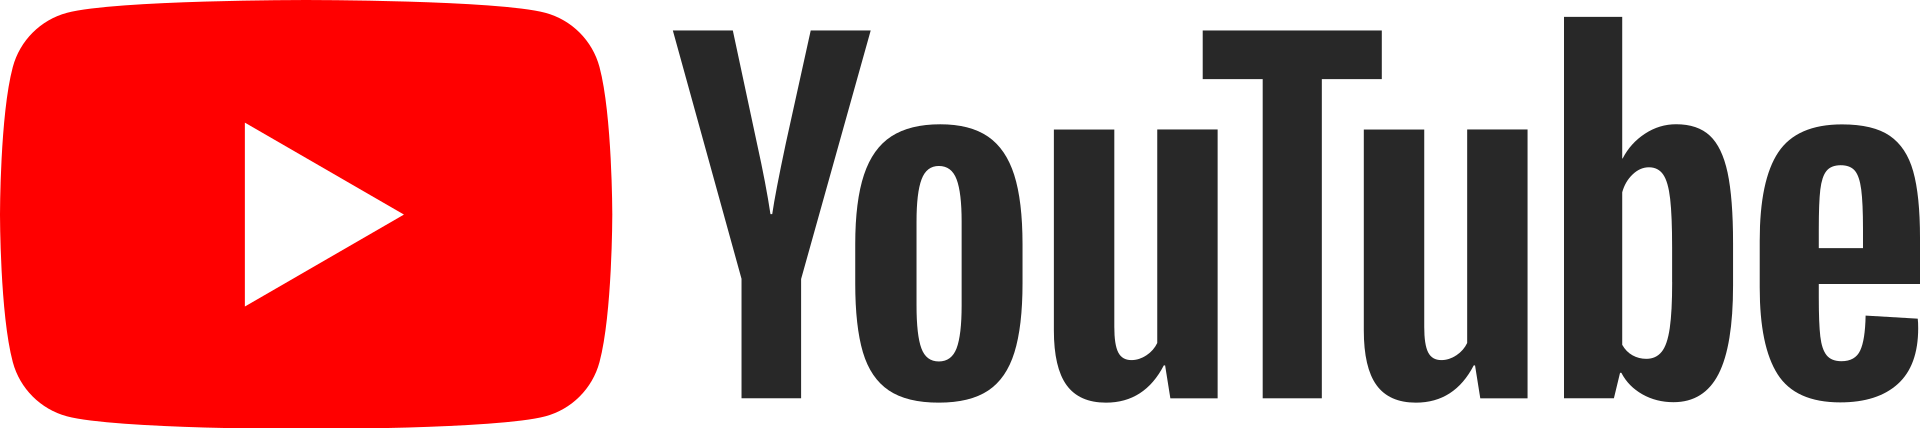 The YouTube logo is made of a red round-rectangular box with a white "play" button inside and the word "YouTube" written in black.